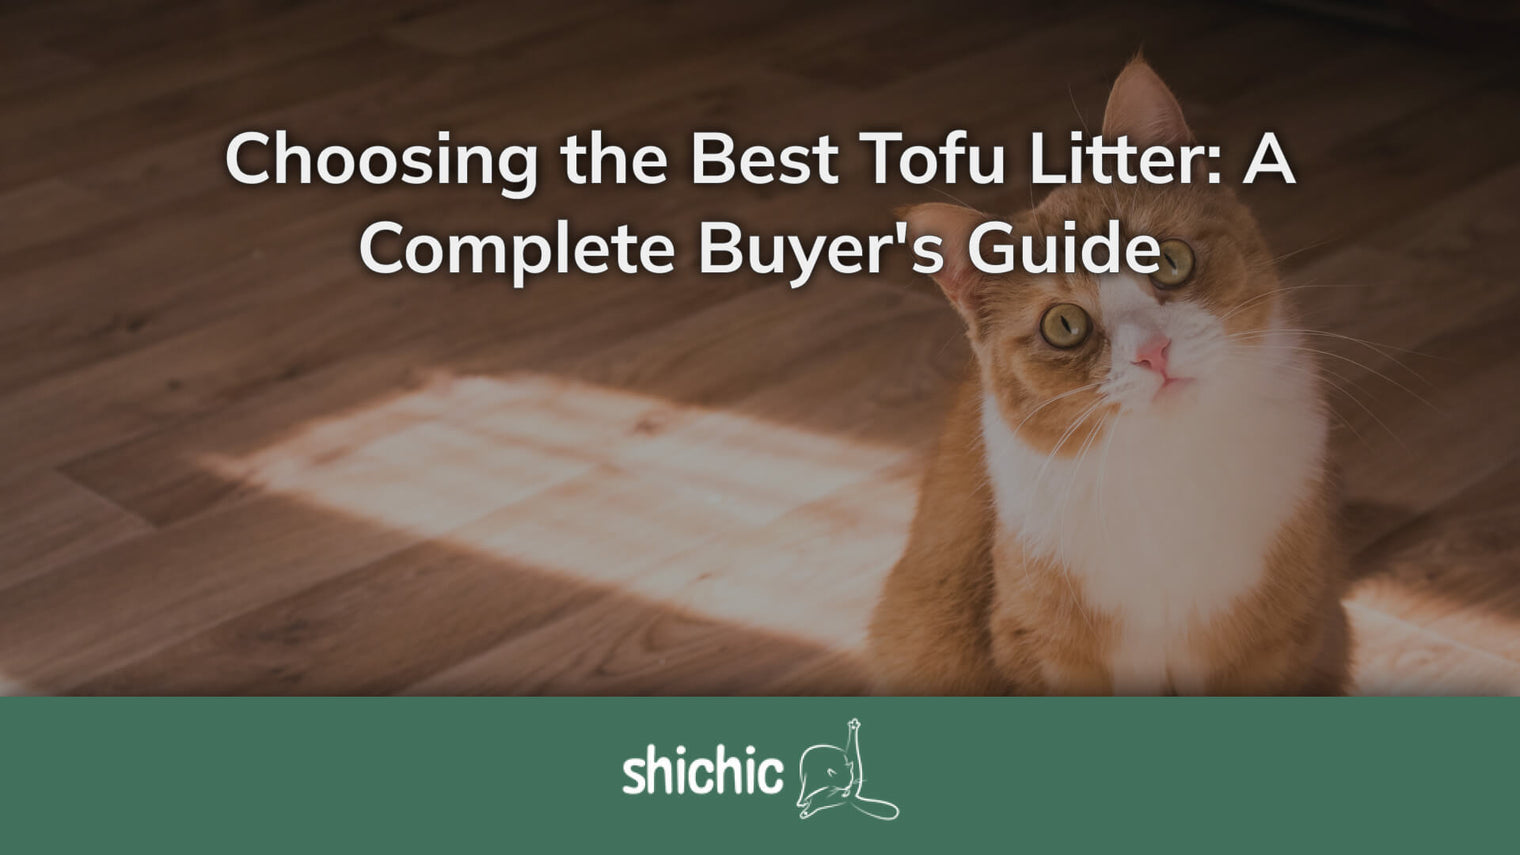 Choosing the Best Tofu Litter: A Complete Buyer's Guide - Shichic